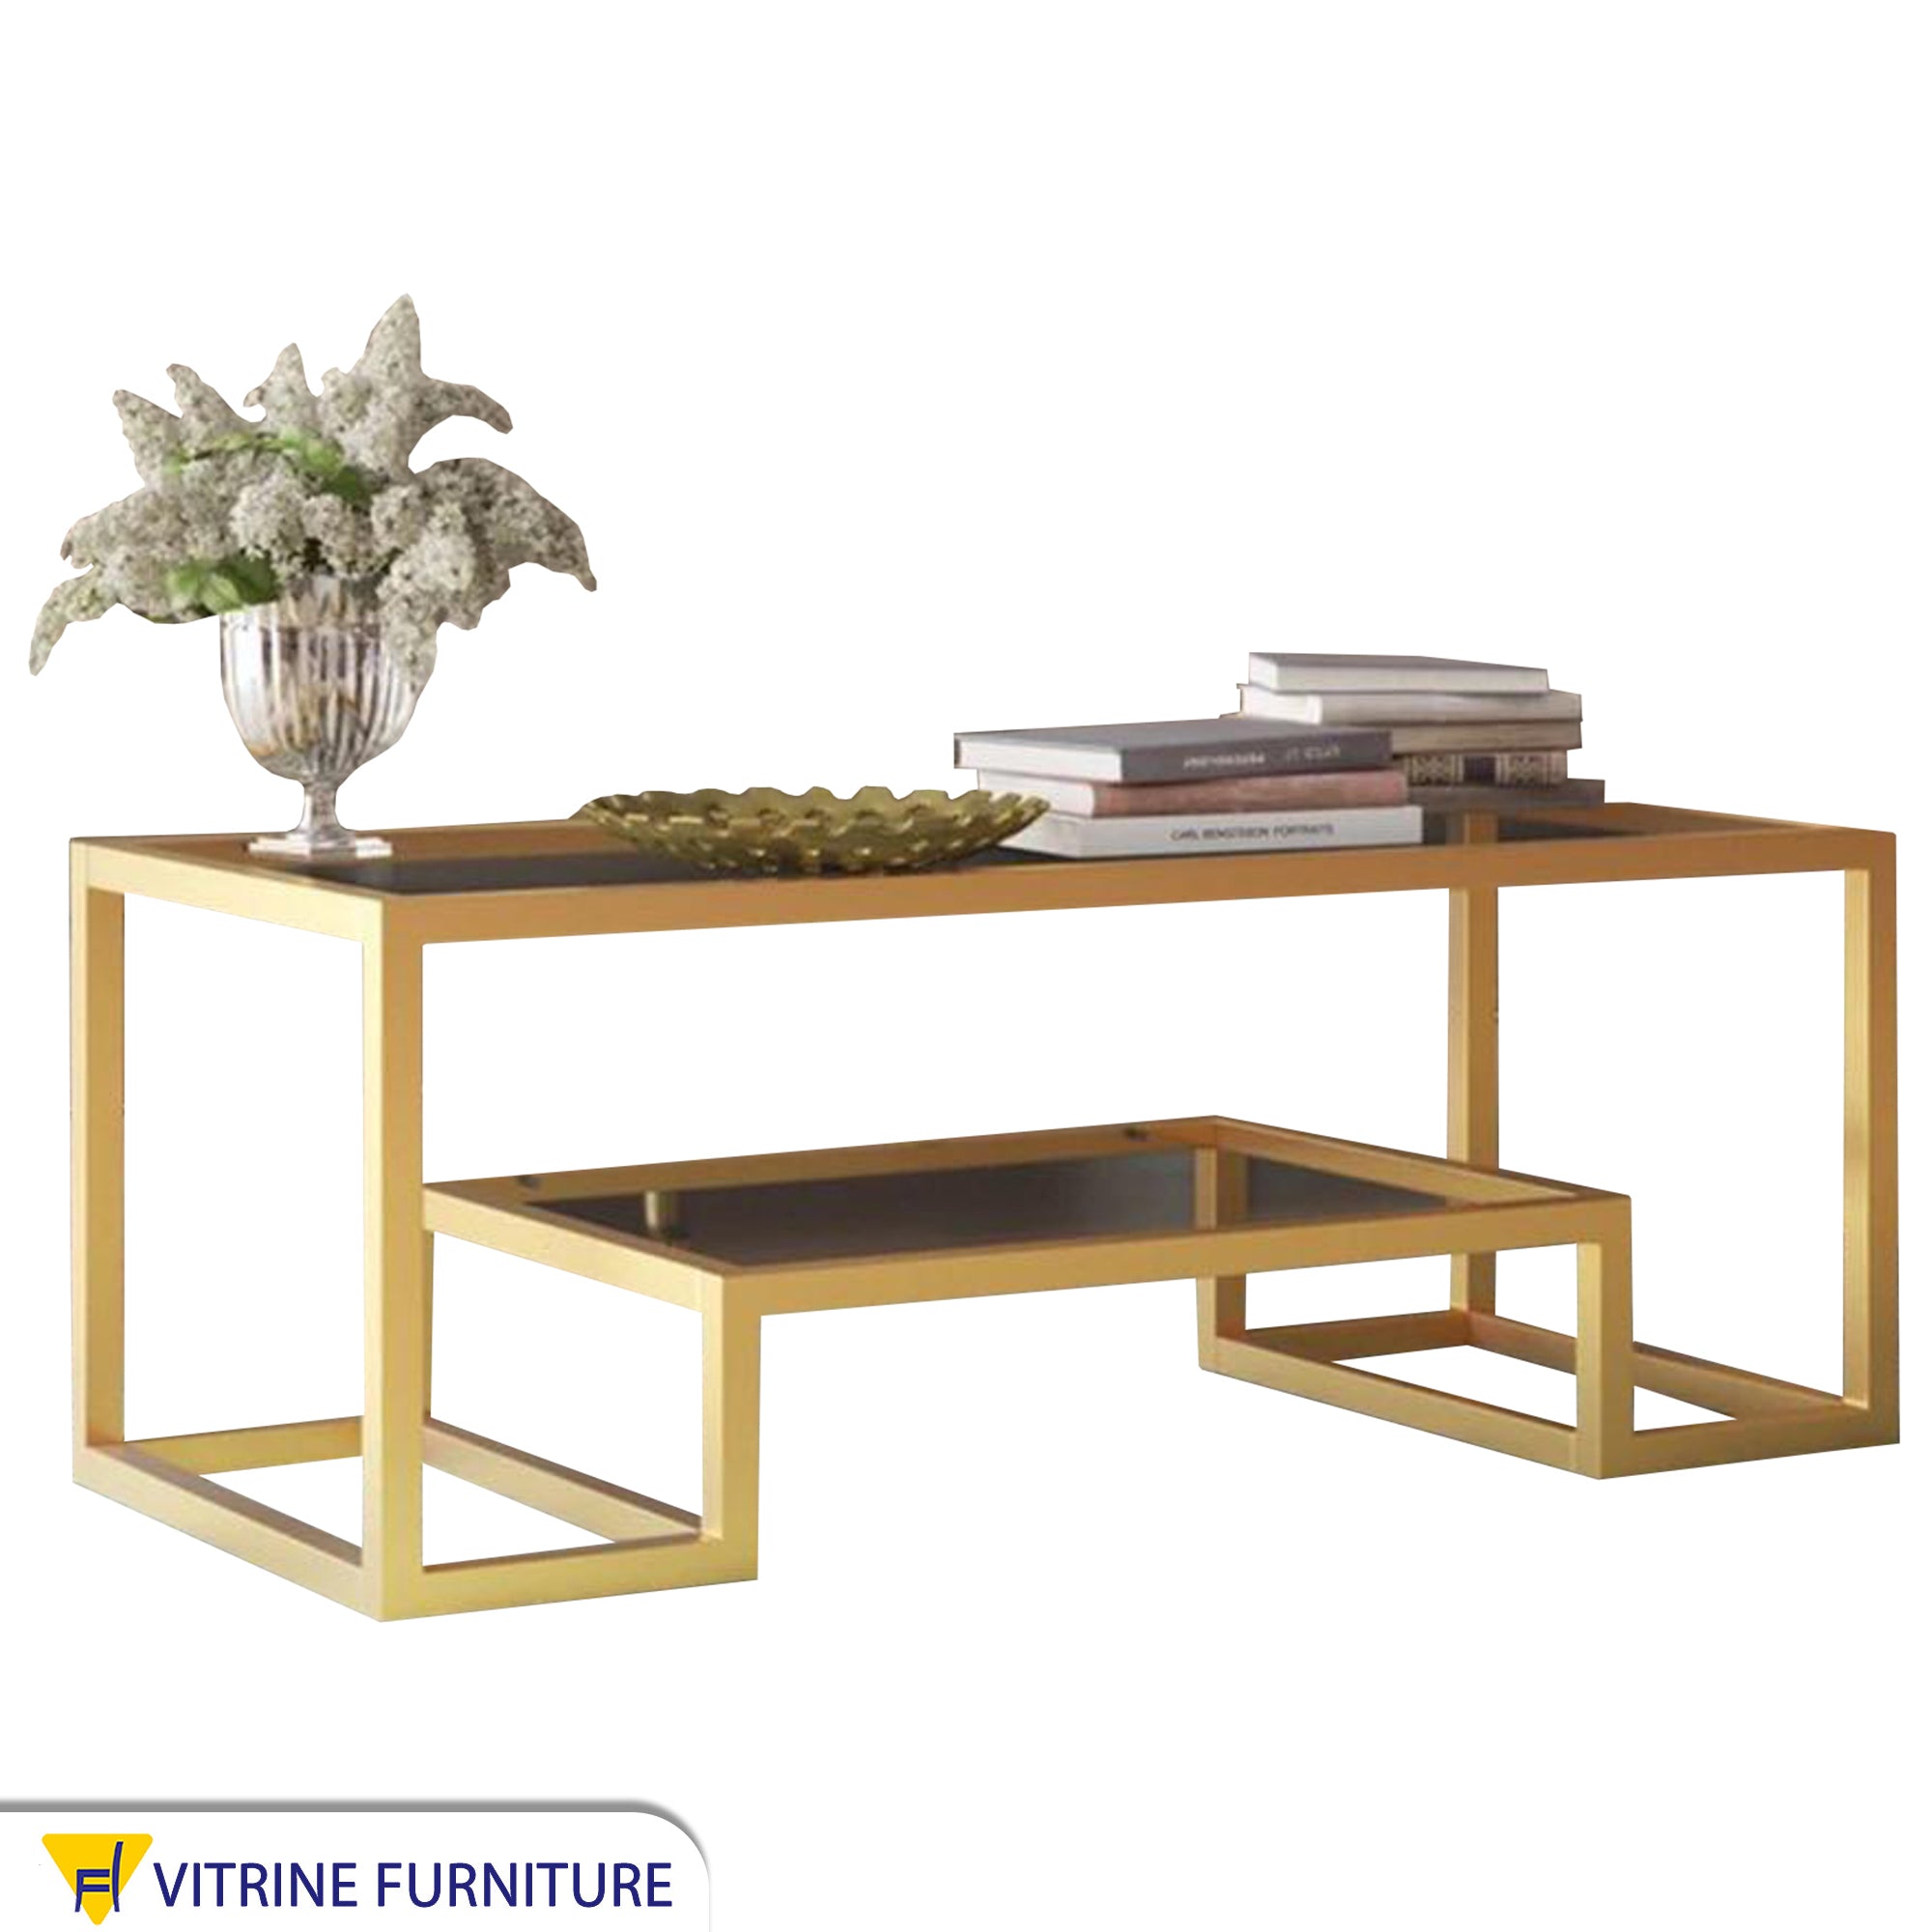 Center table with two tiered surfaces